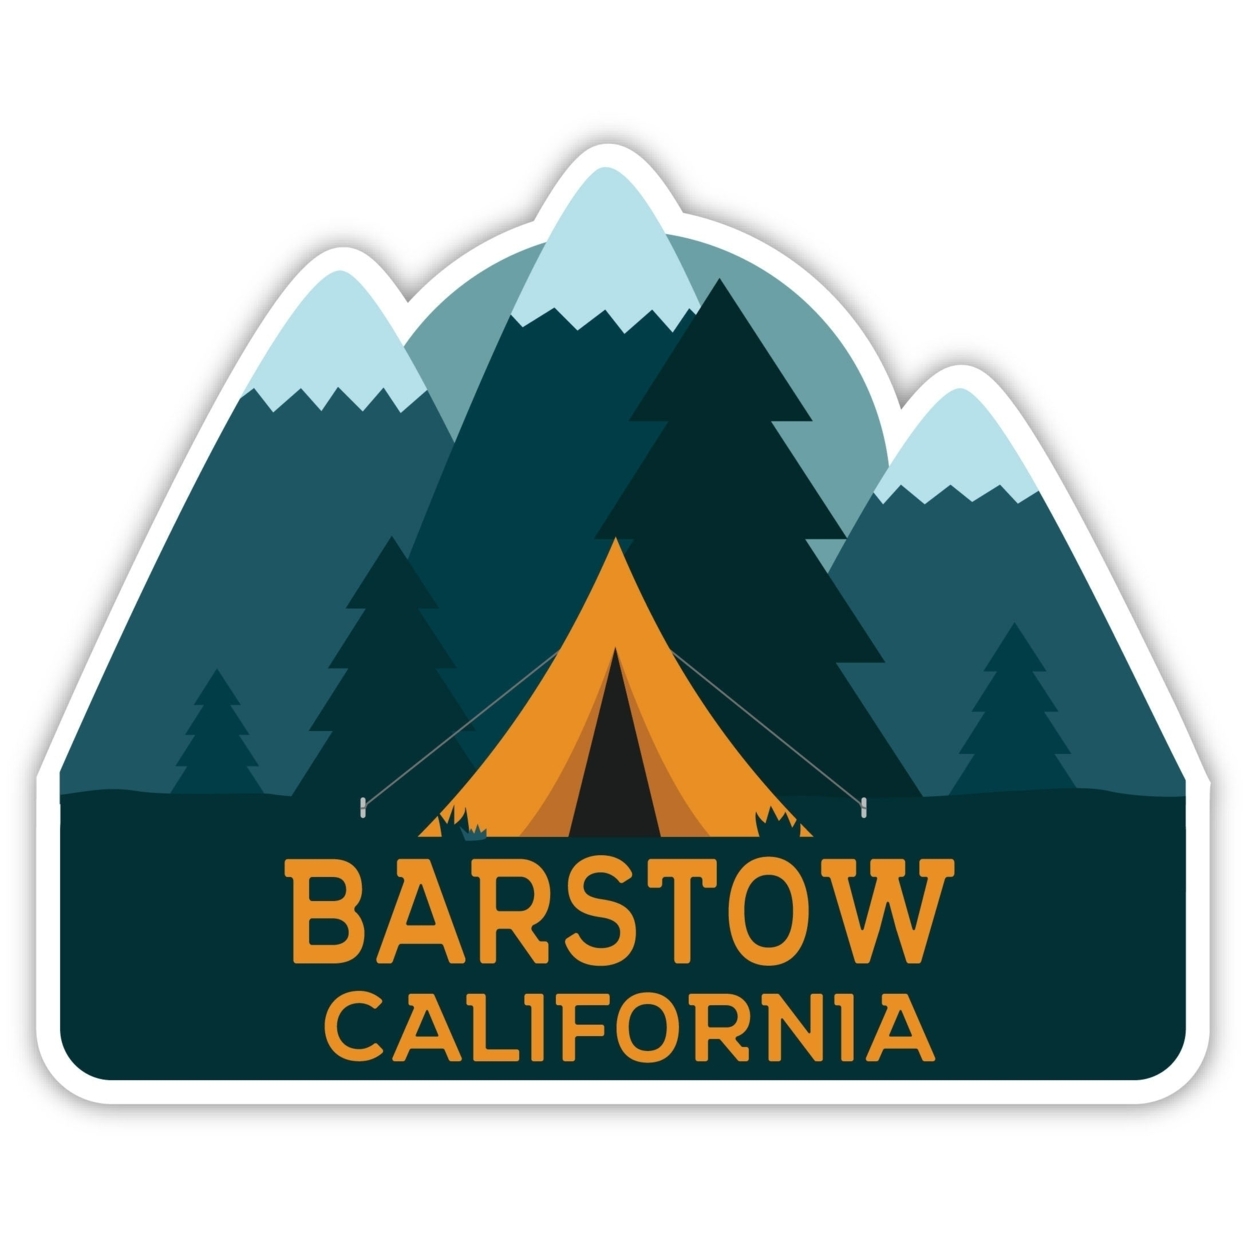 Barstow California Souvenir Decorative Stickers (Choose Theme And Size) - 4-Pack, 12-Inch, Adventures Awaits